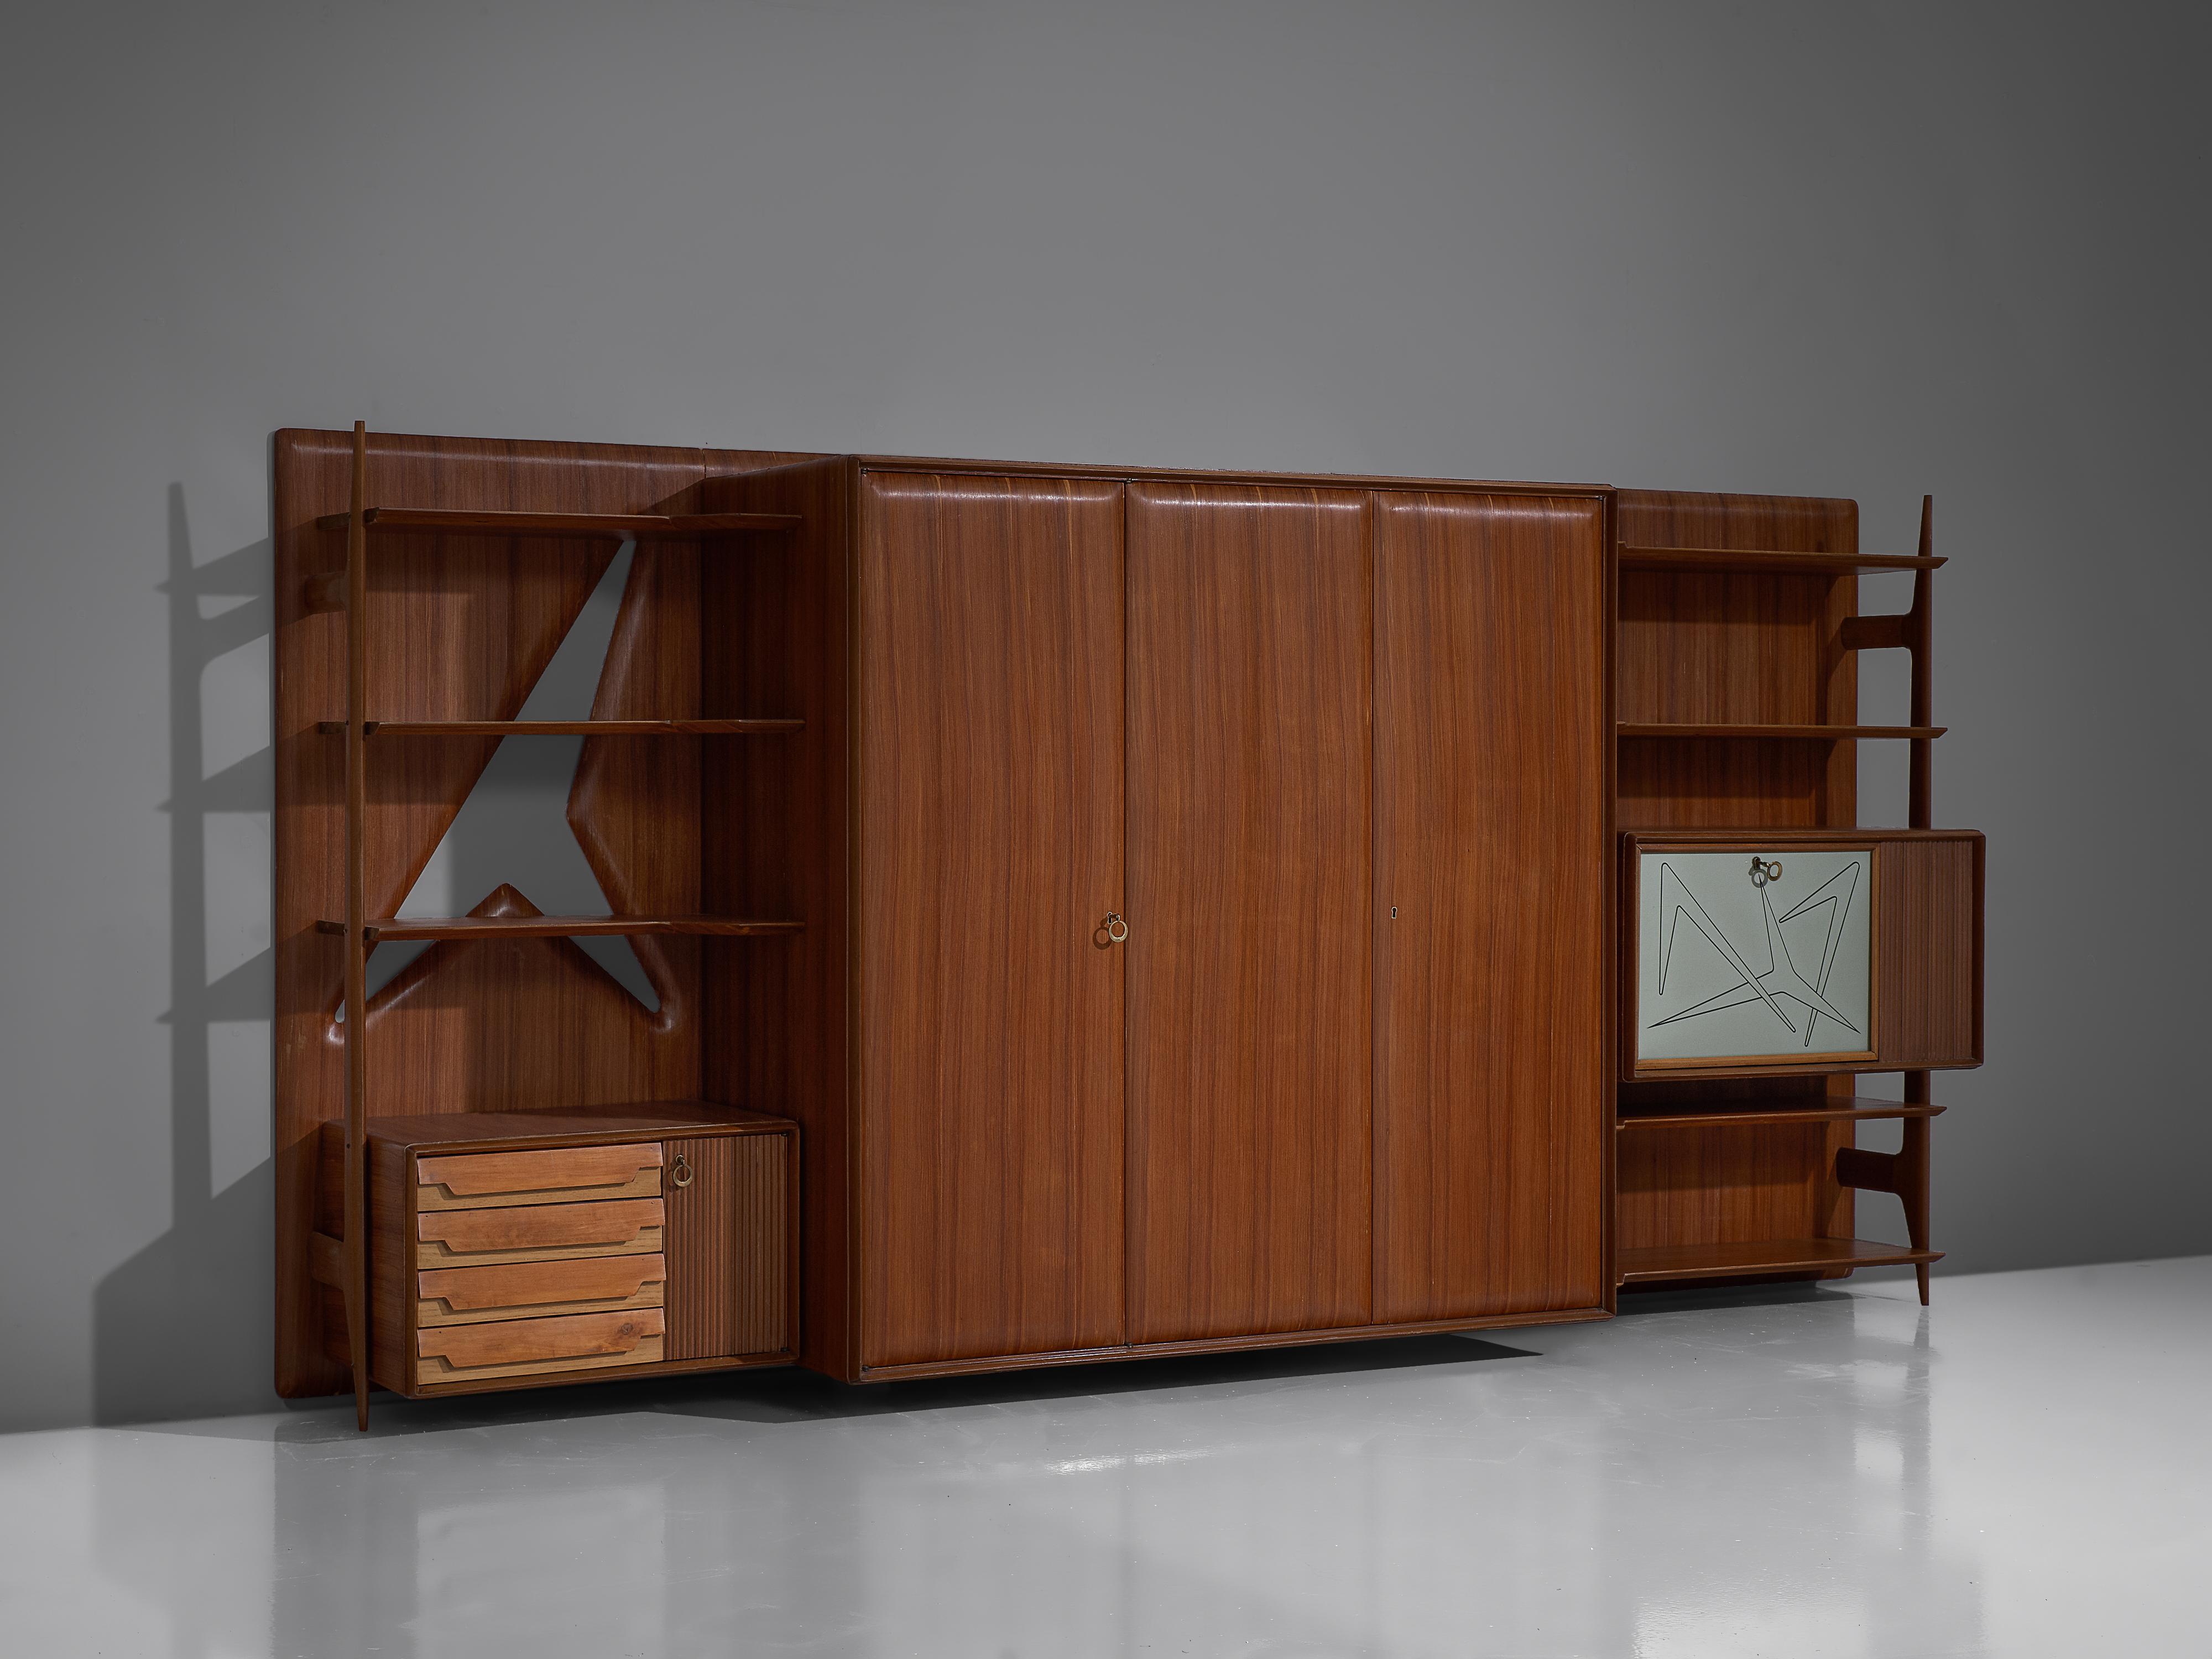 Wall unit, teak, maple, lacquered wood, brass, glass, Italy, 1950s.

This Mid-Century Italian wall unit seamlessly integrates form and function, captivating with its aesthetic allure and practicality. Its design presents a myriad of storage